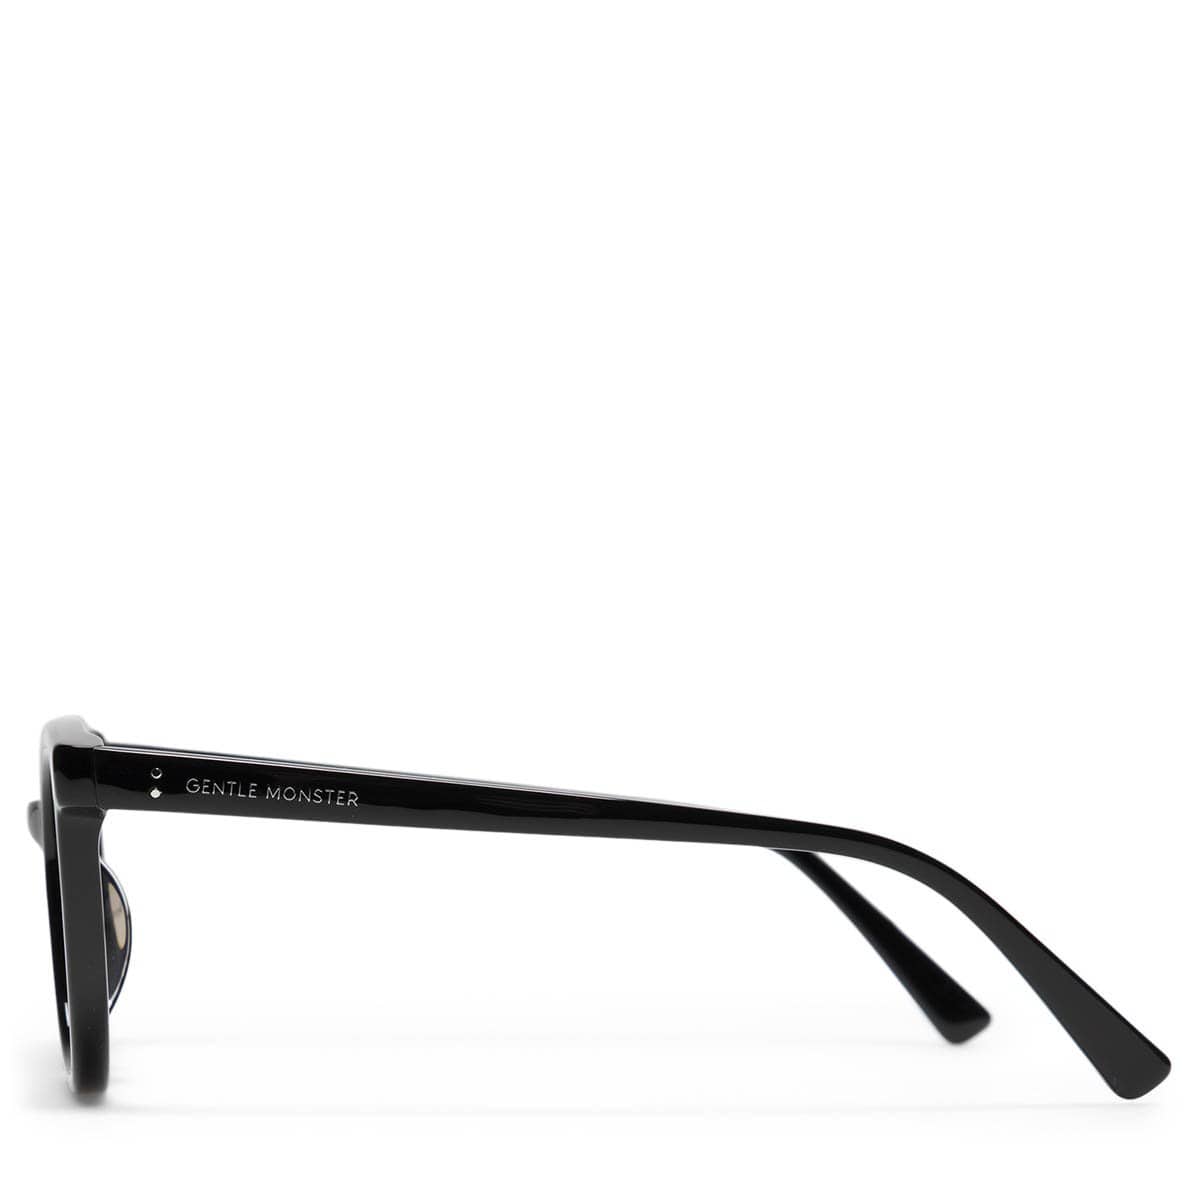 Gentle Monster Accessories - Sunglasses Black / O/S TOMY 01(BR)